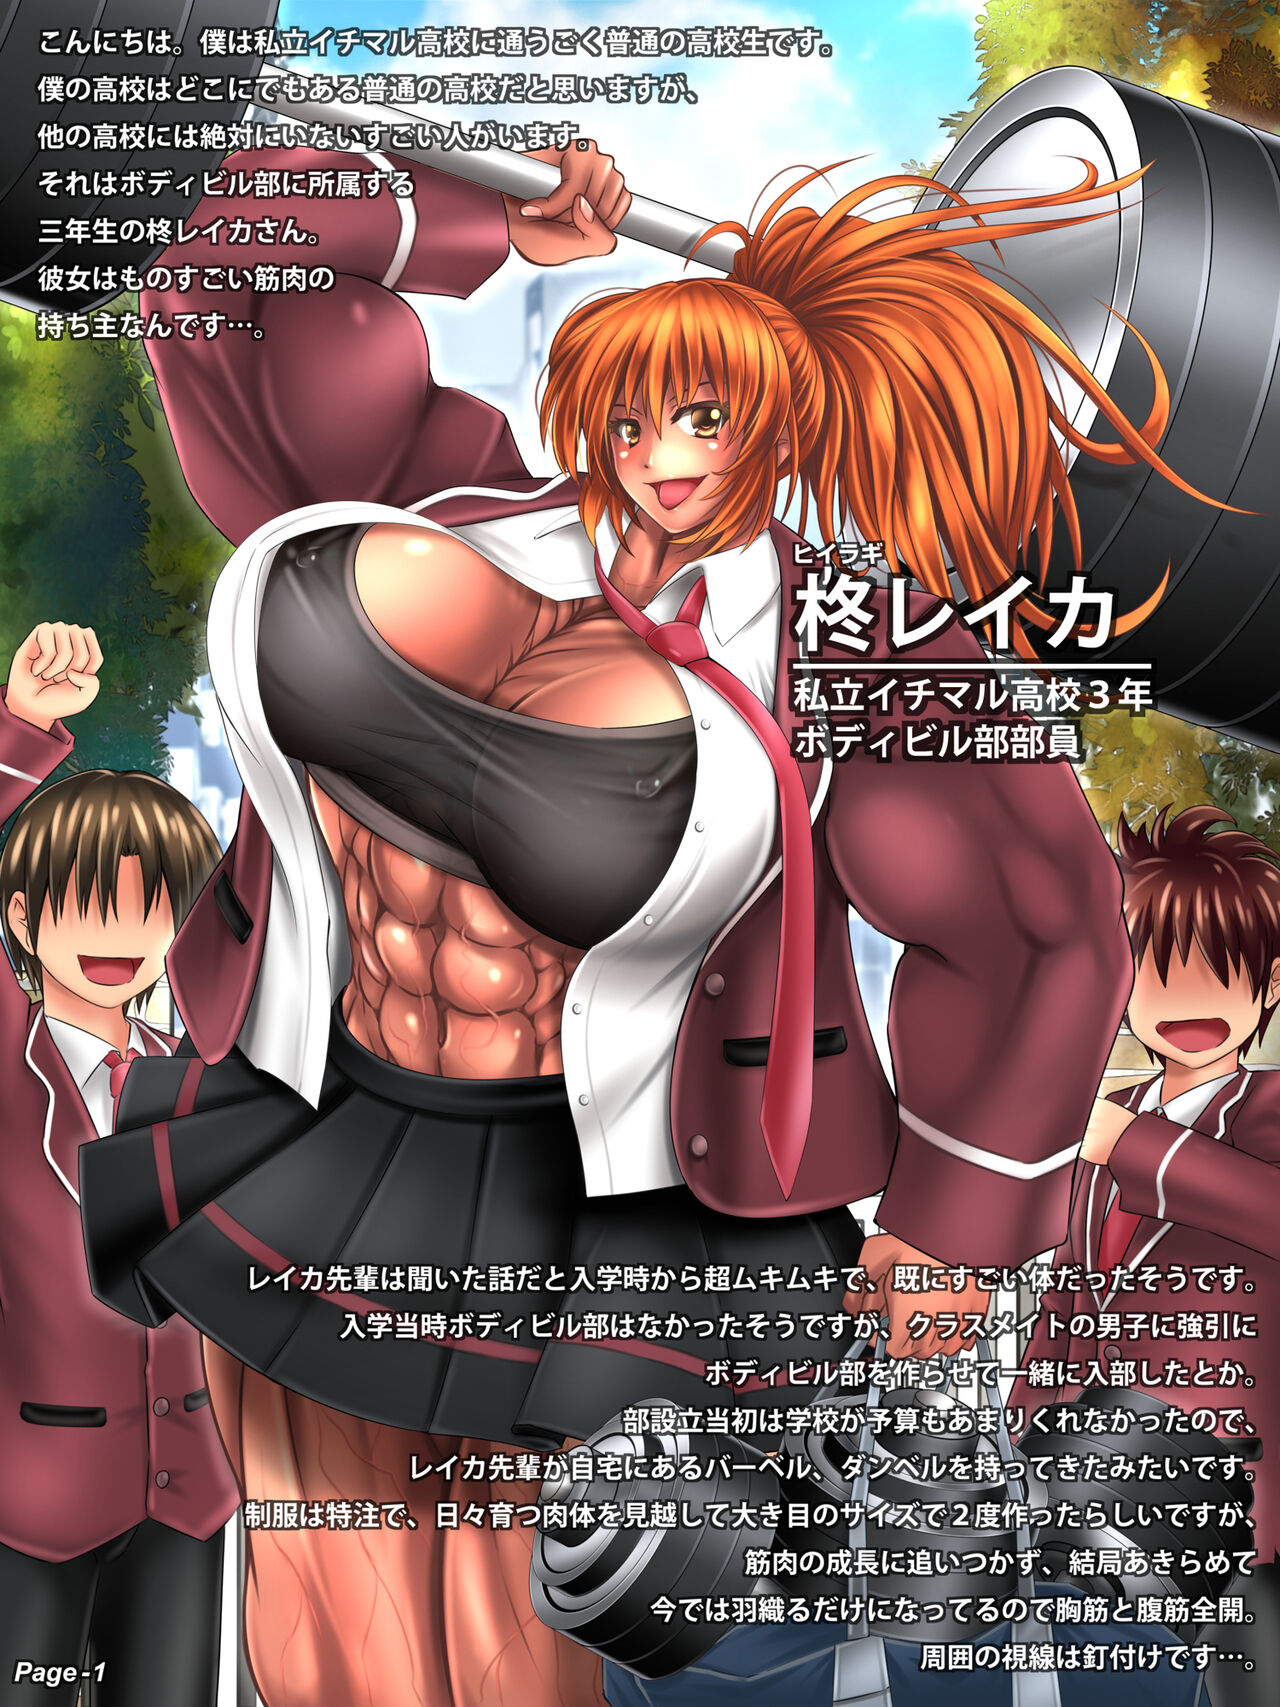 Anime Muscle Girl Porn - Macto2nd MUSCLE GIRL ILLUSTRATIONS vol.2 - Page 3 - HentaiEra